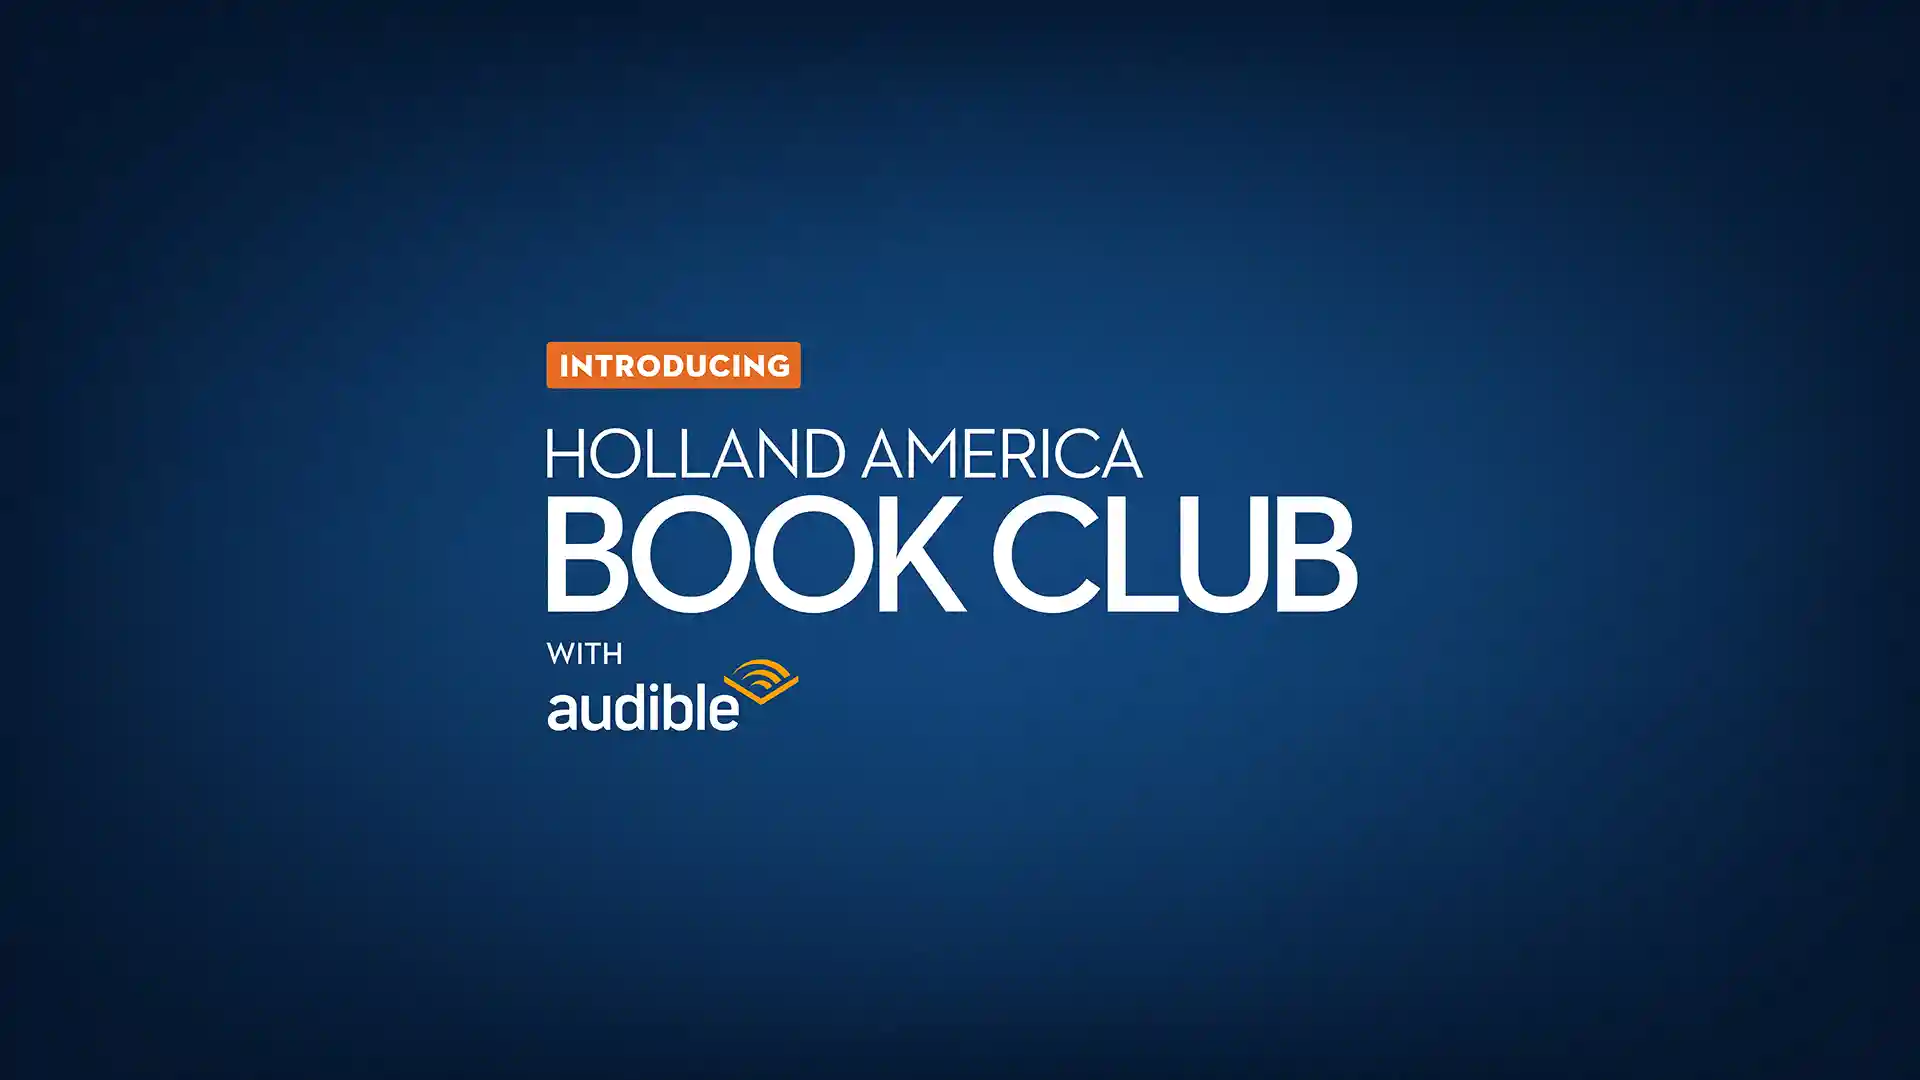 Blue background with text noting Holland America's Book Club with Audible.